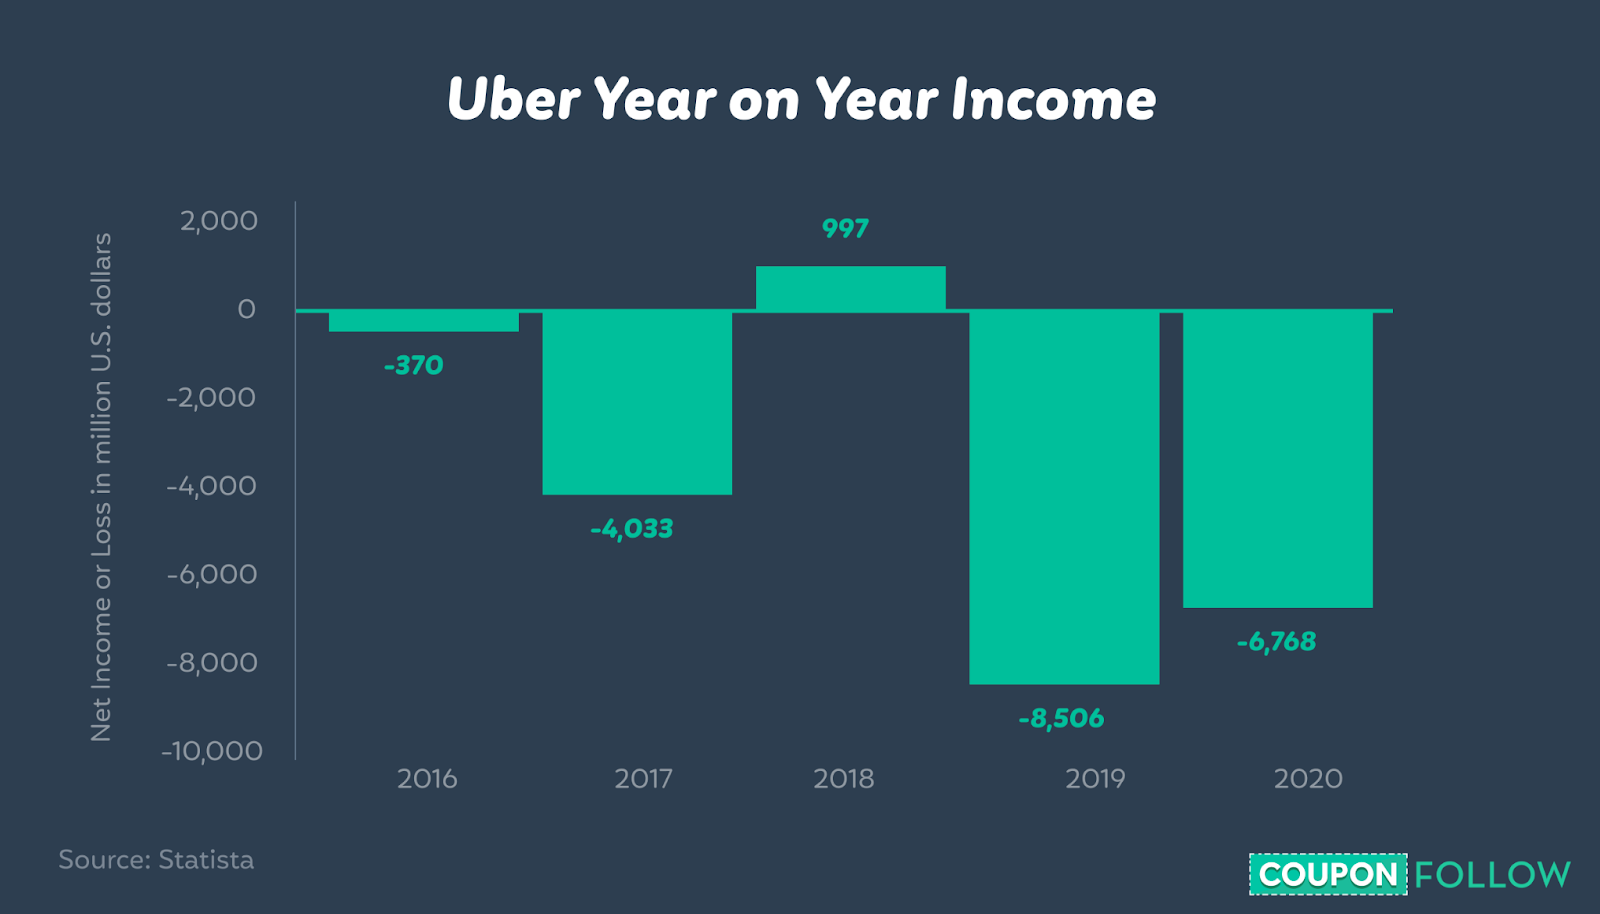 Graph showing Uber's income year on year